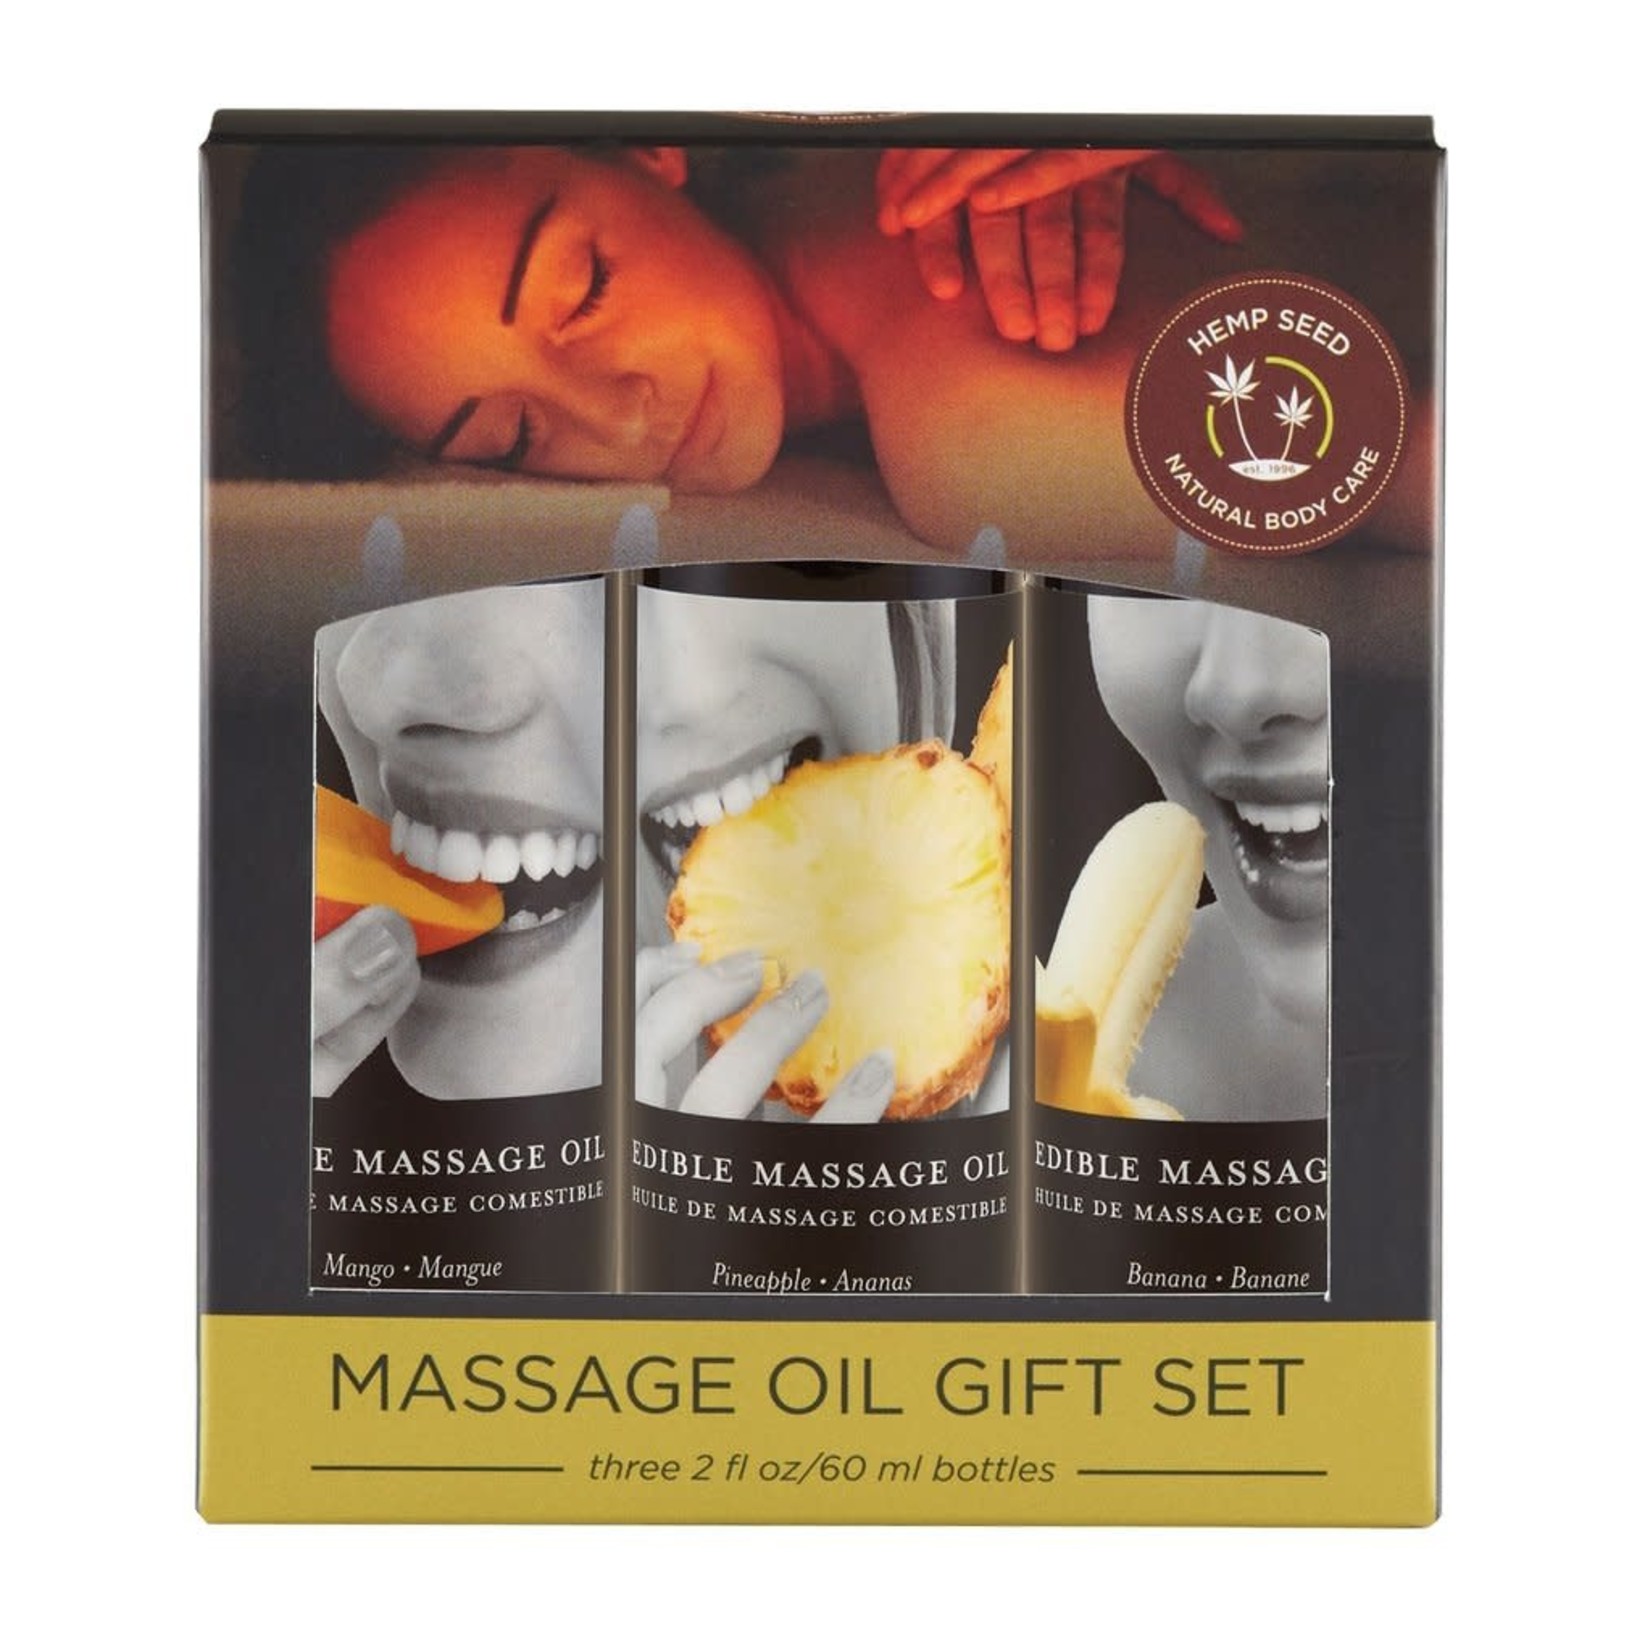 EARTHLY BODY EARTHLY BODIES - EDIBLE MASSAGE OIL GIFT v2 SET 3x2oz